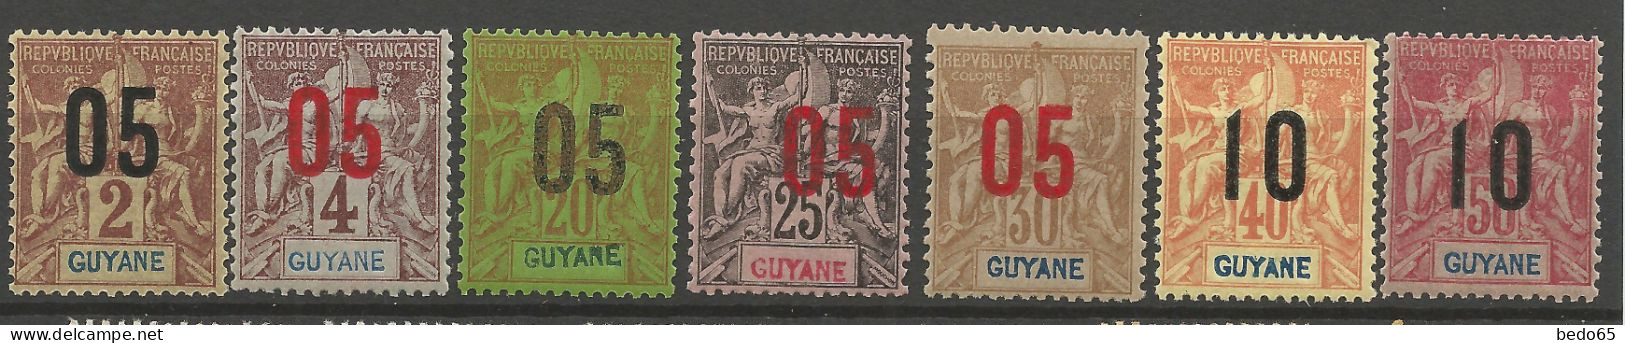 GUYANE N° 66 à 72 Série Complète NEUF** LUXE SANS CHARNIERE / Hingeless / MNH - Unused Stamps